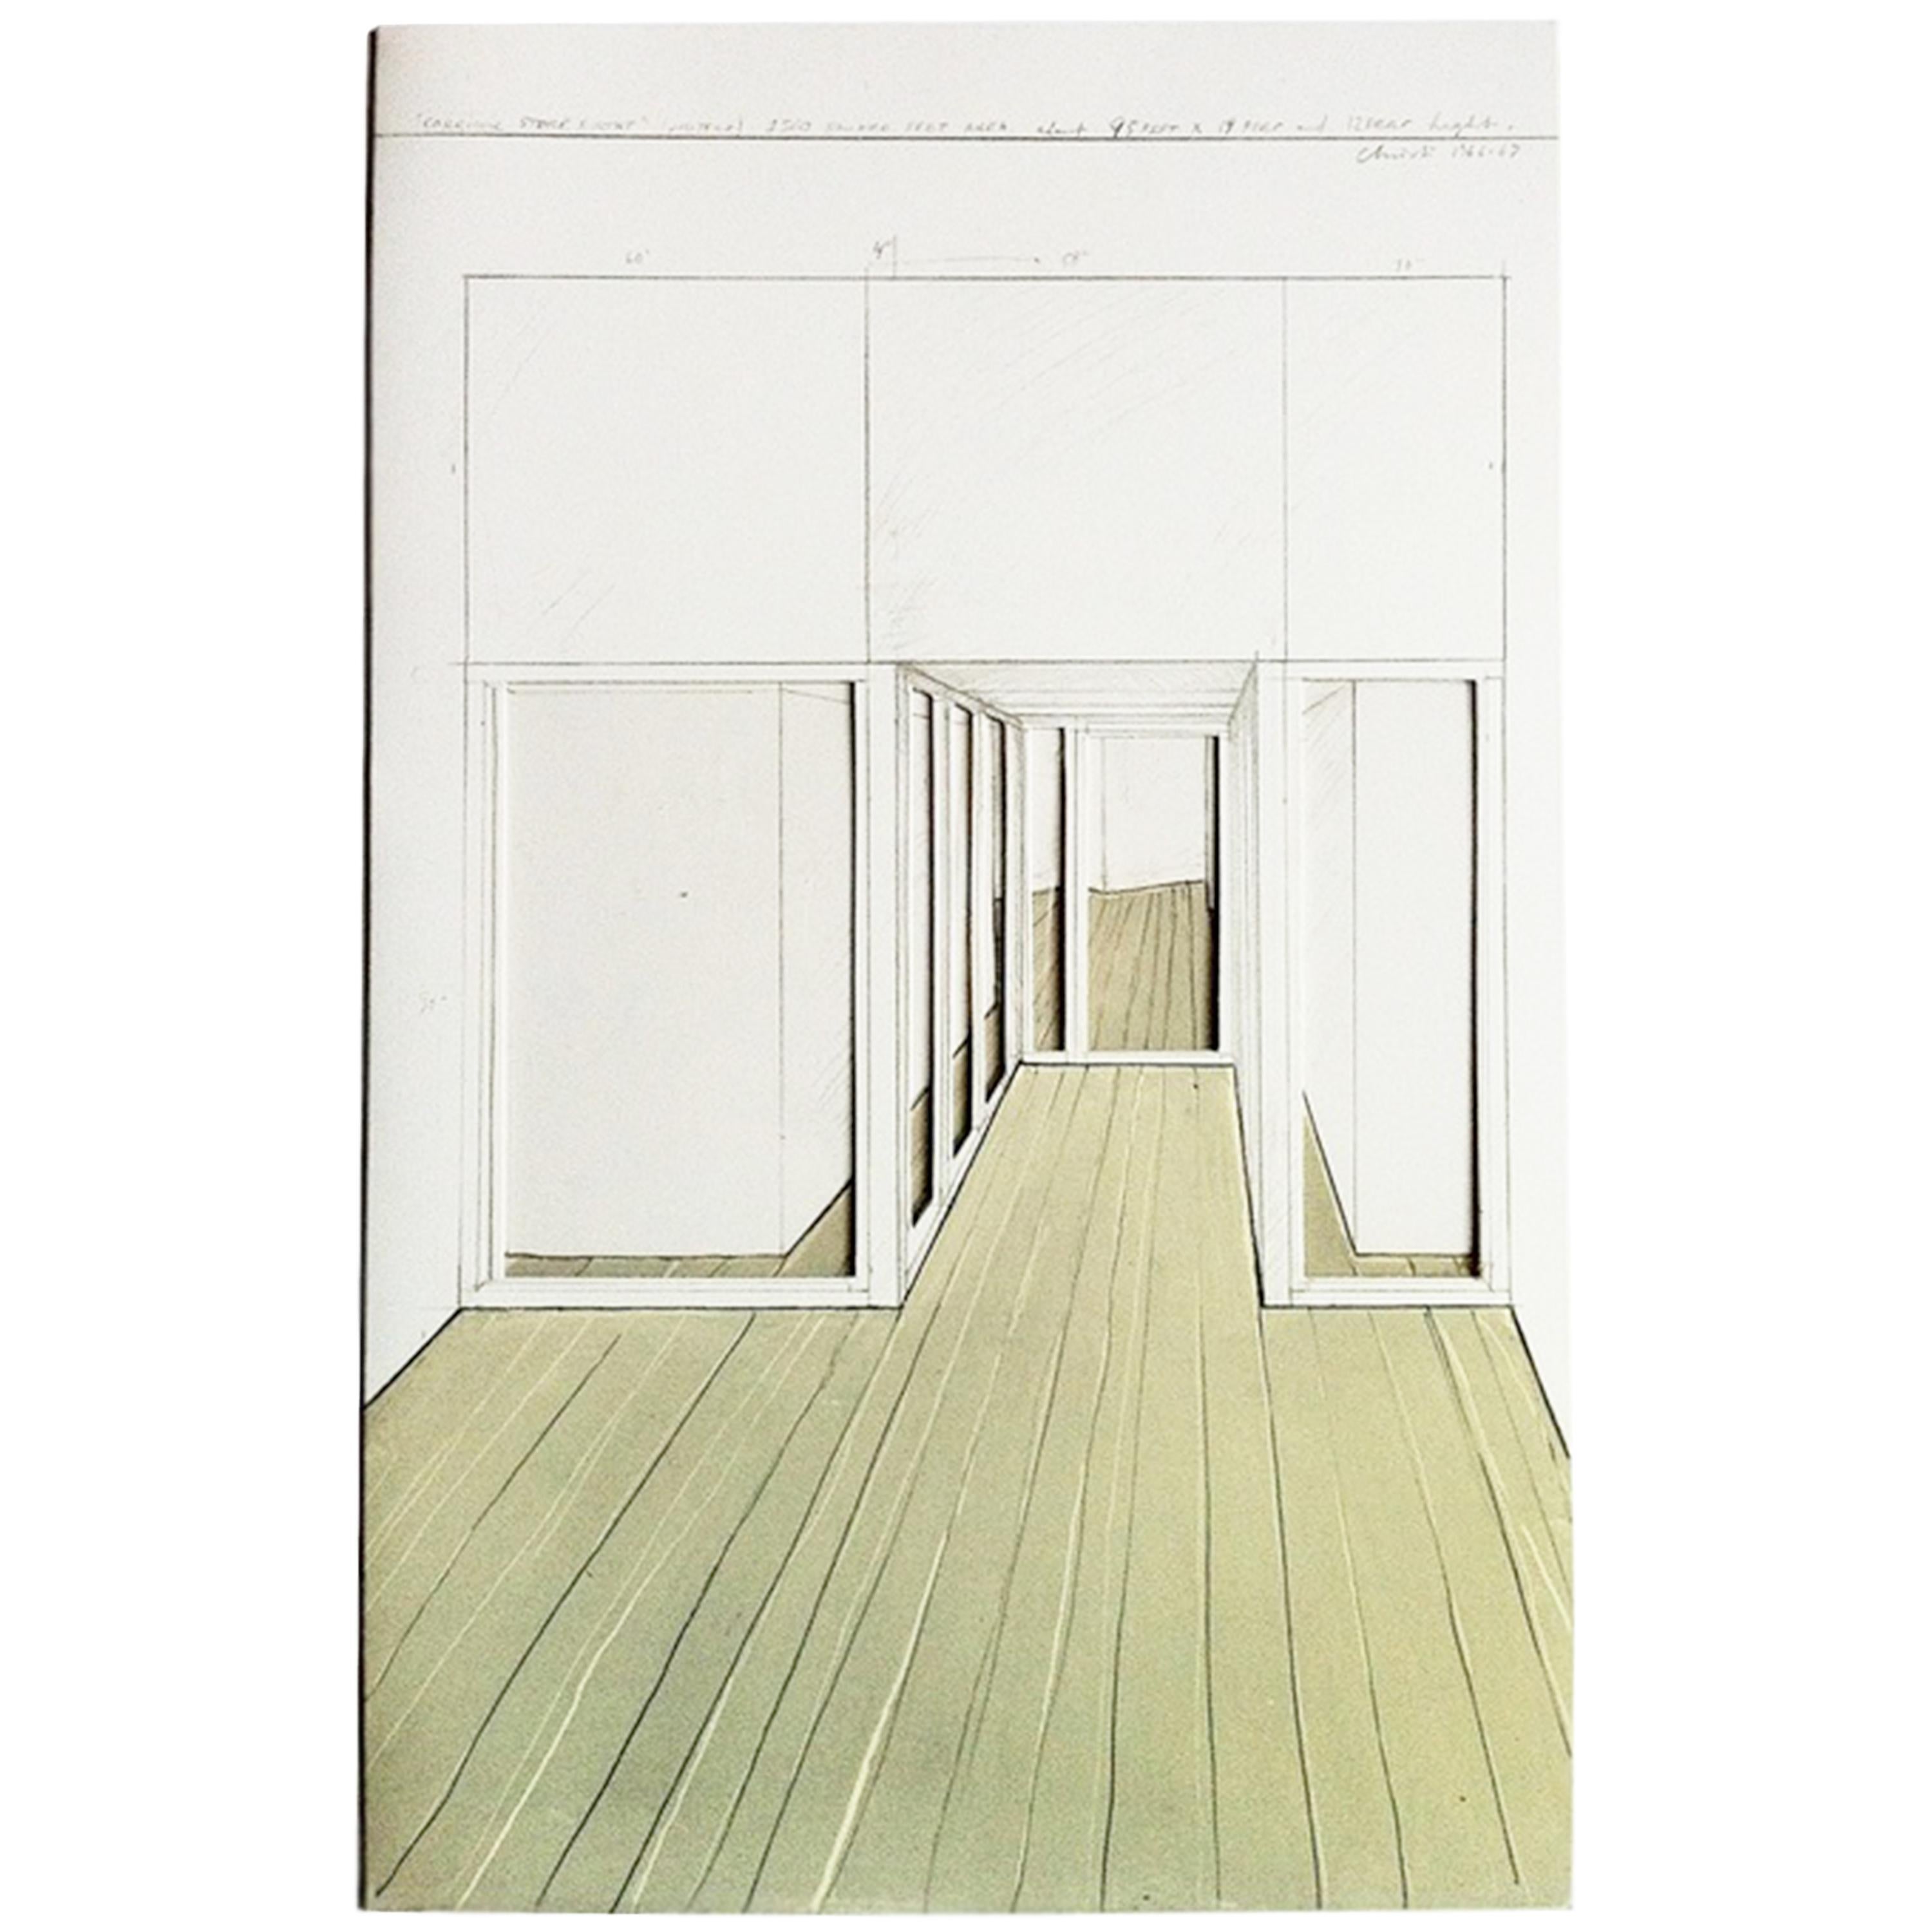 Corridor Storefront - Print by Christo and Jeanne-Claude